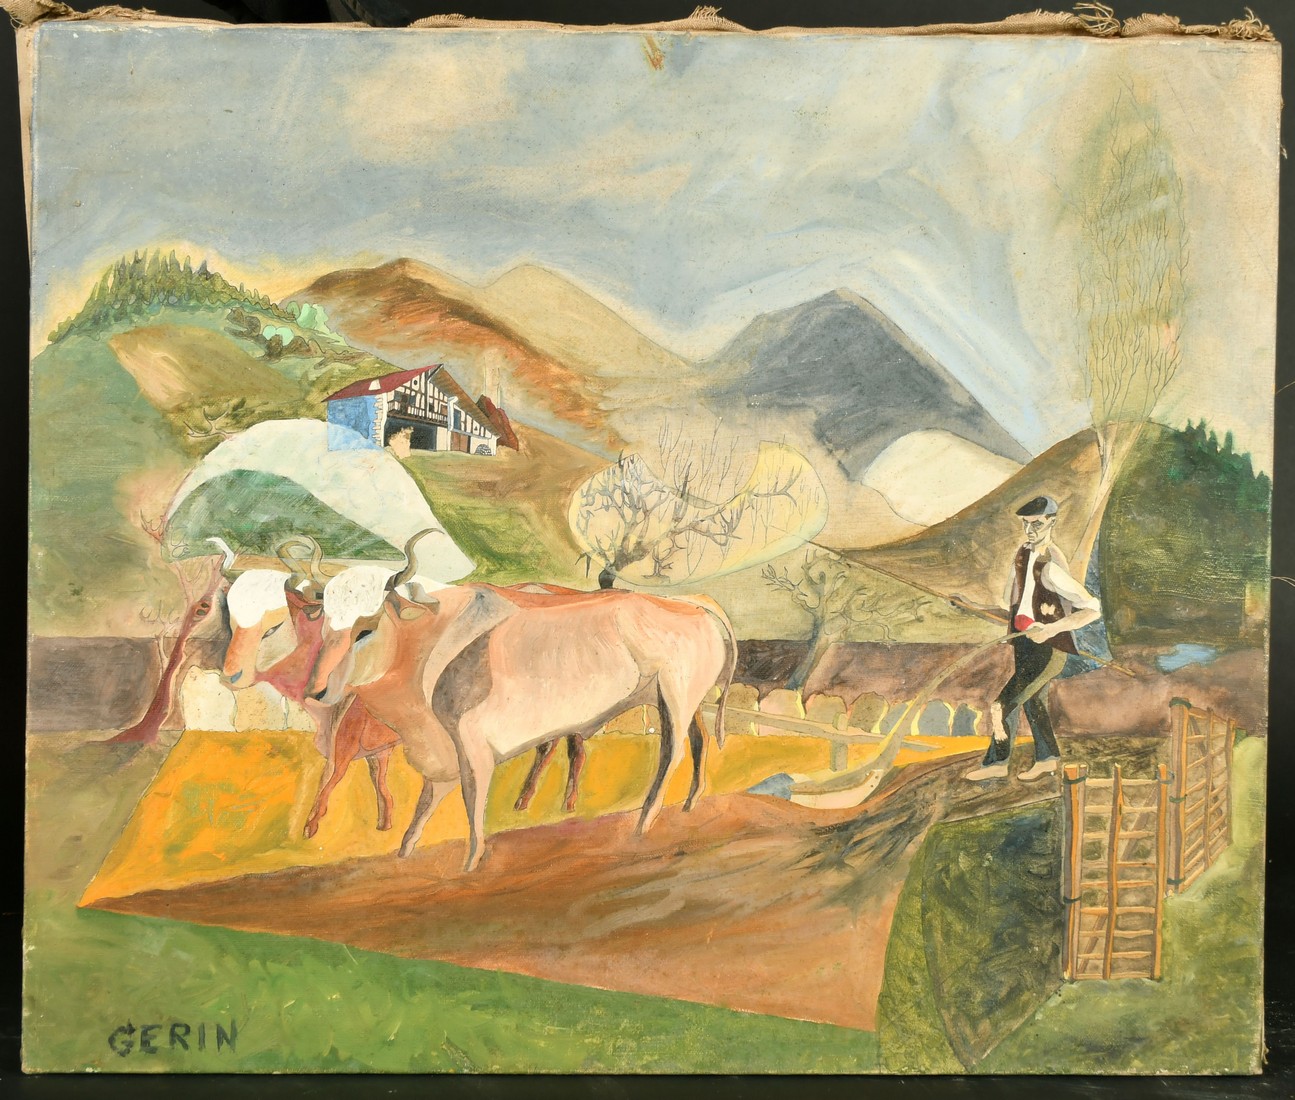 Gerin, 20th Century, A farmer and oxen ploughing a field in a stylised landscape, oil on canvas, 18" - Image 2 of 4